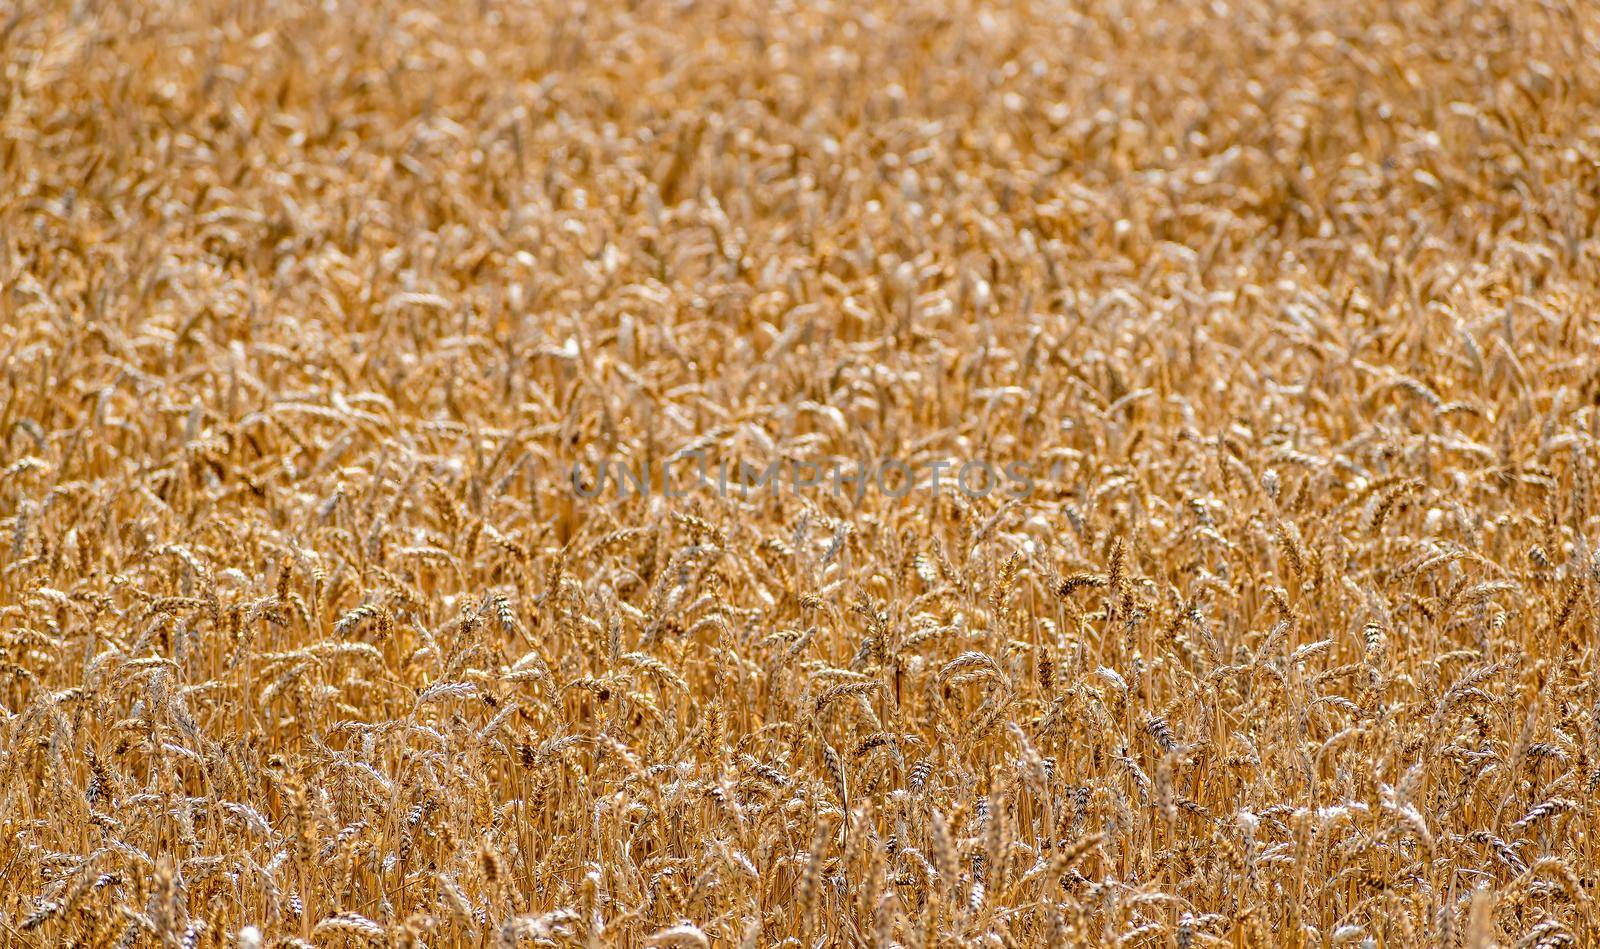 Texture, background for further work. Field of ripe grain pros tick into the distance blurred